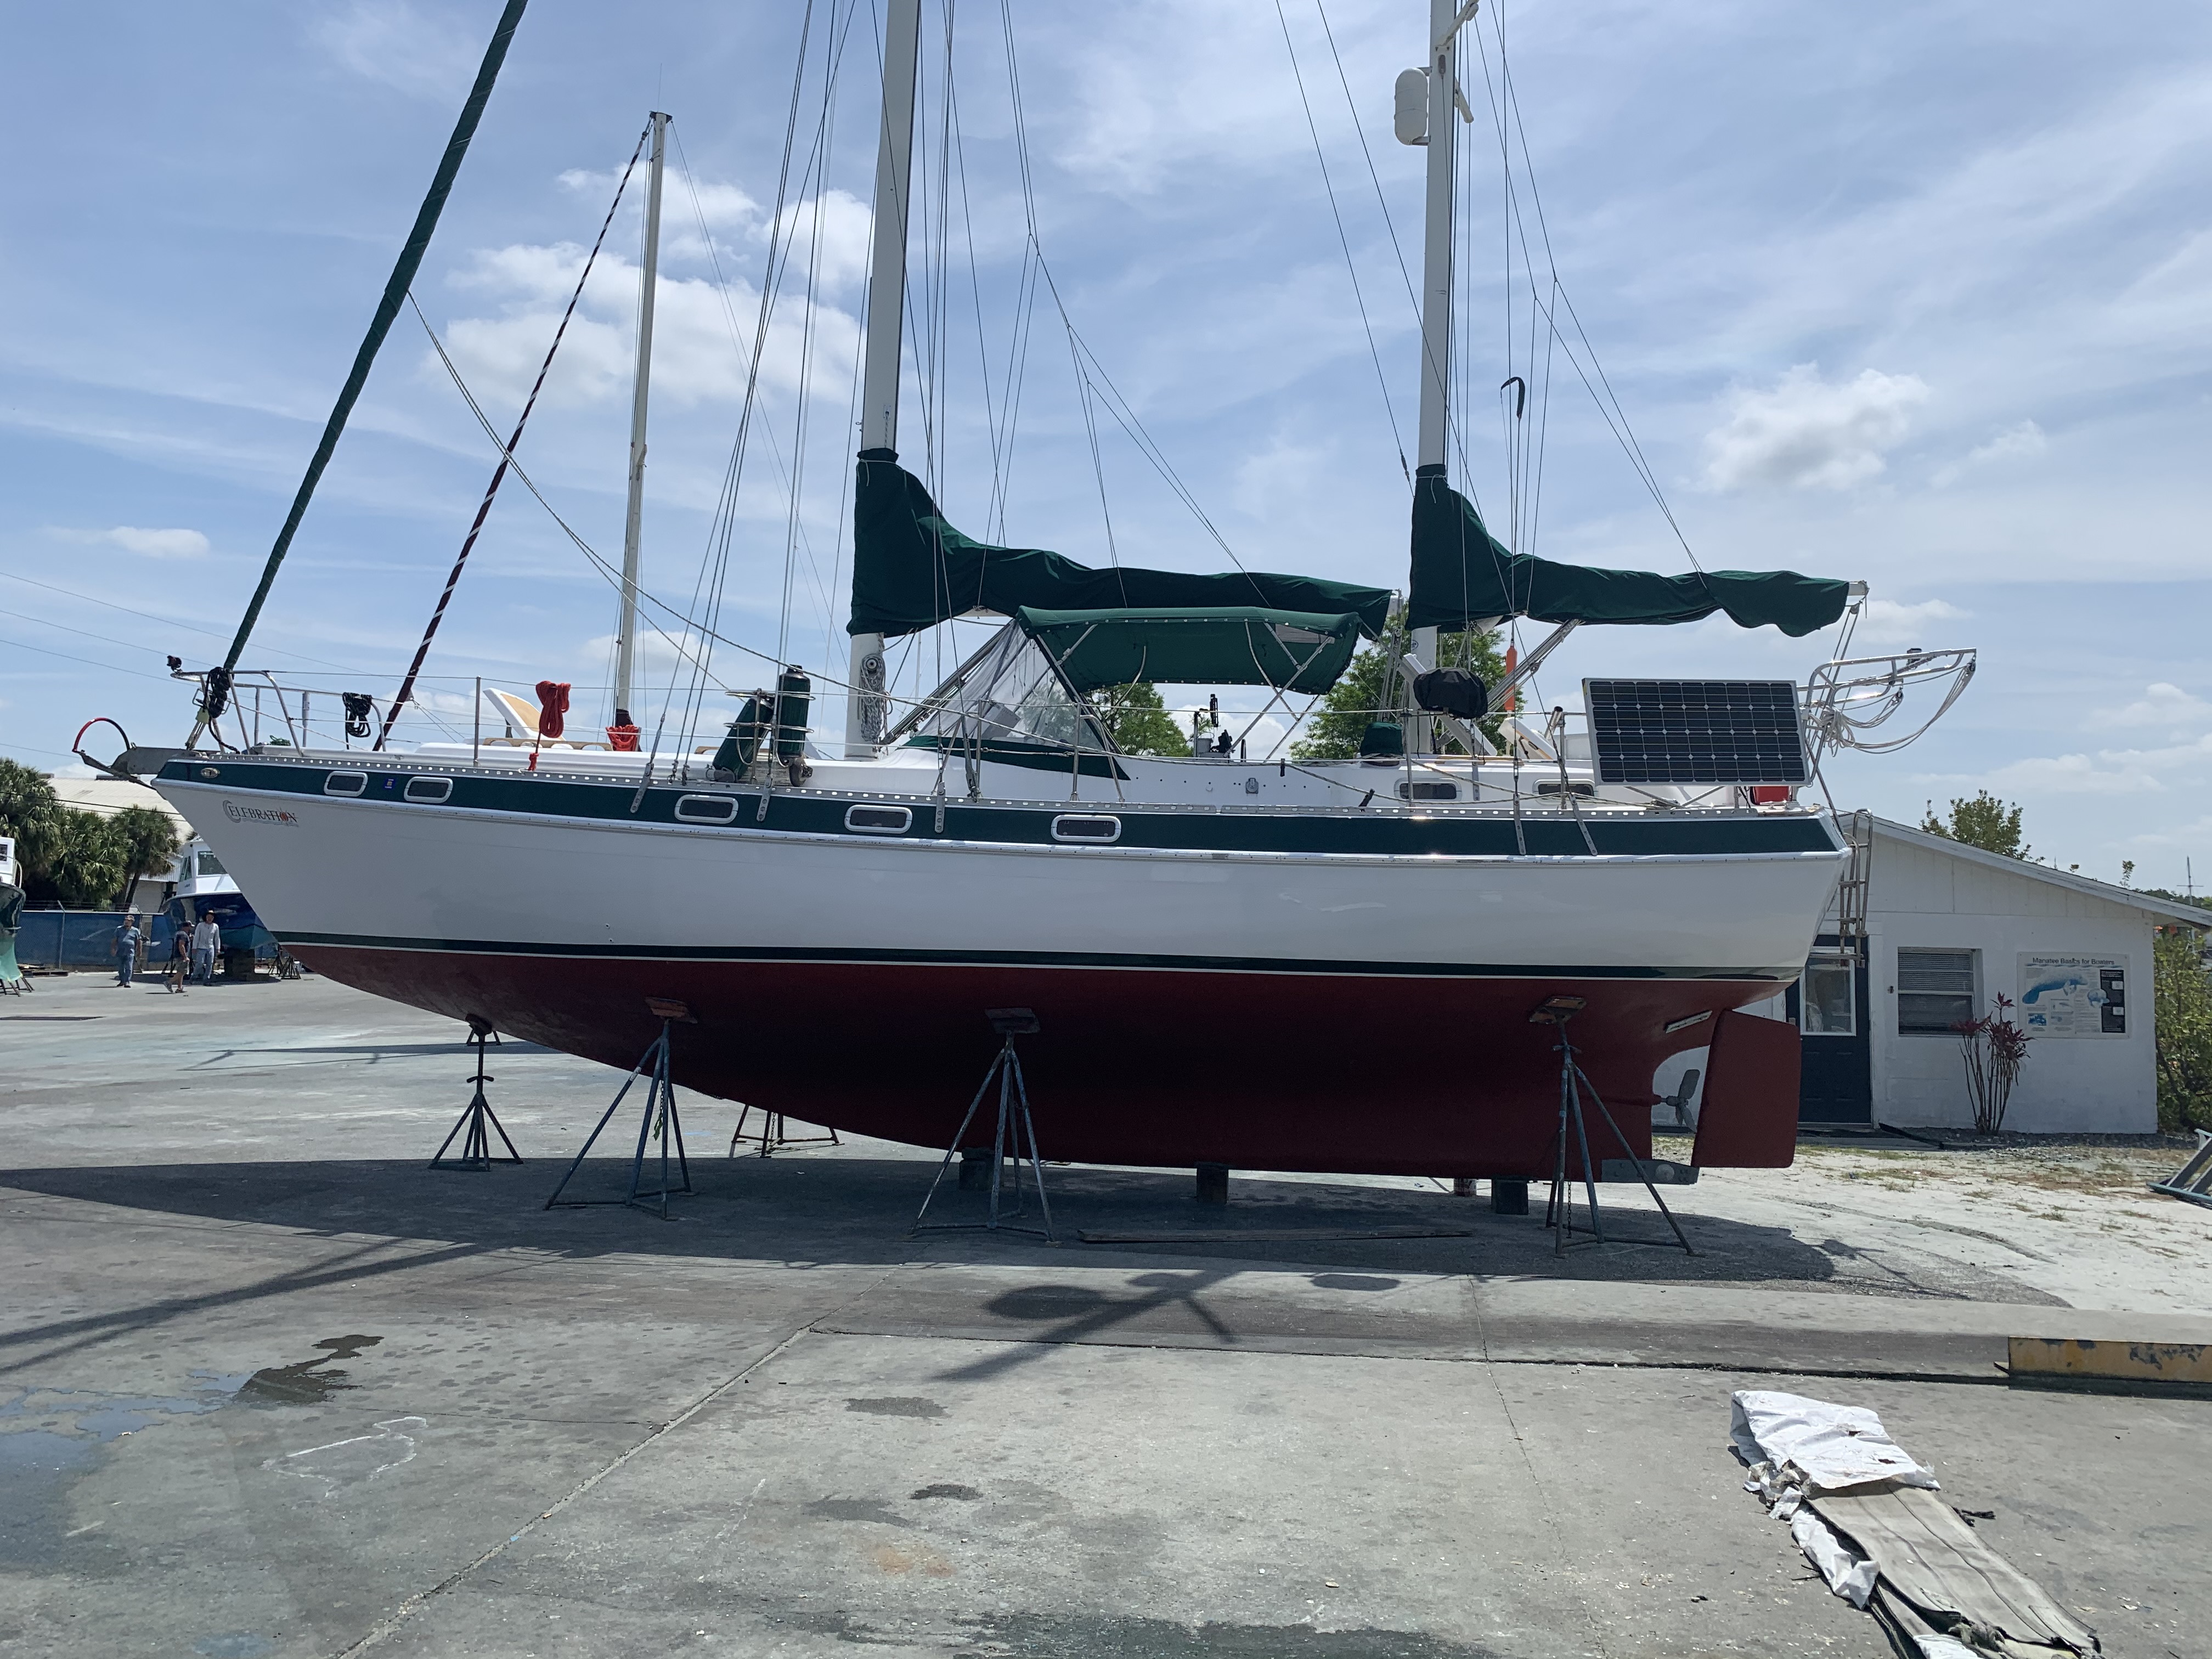 1979 Morgan 415 Out Island Ketch Sailboat for sale in St Petersburg, FL - image 29 